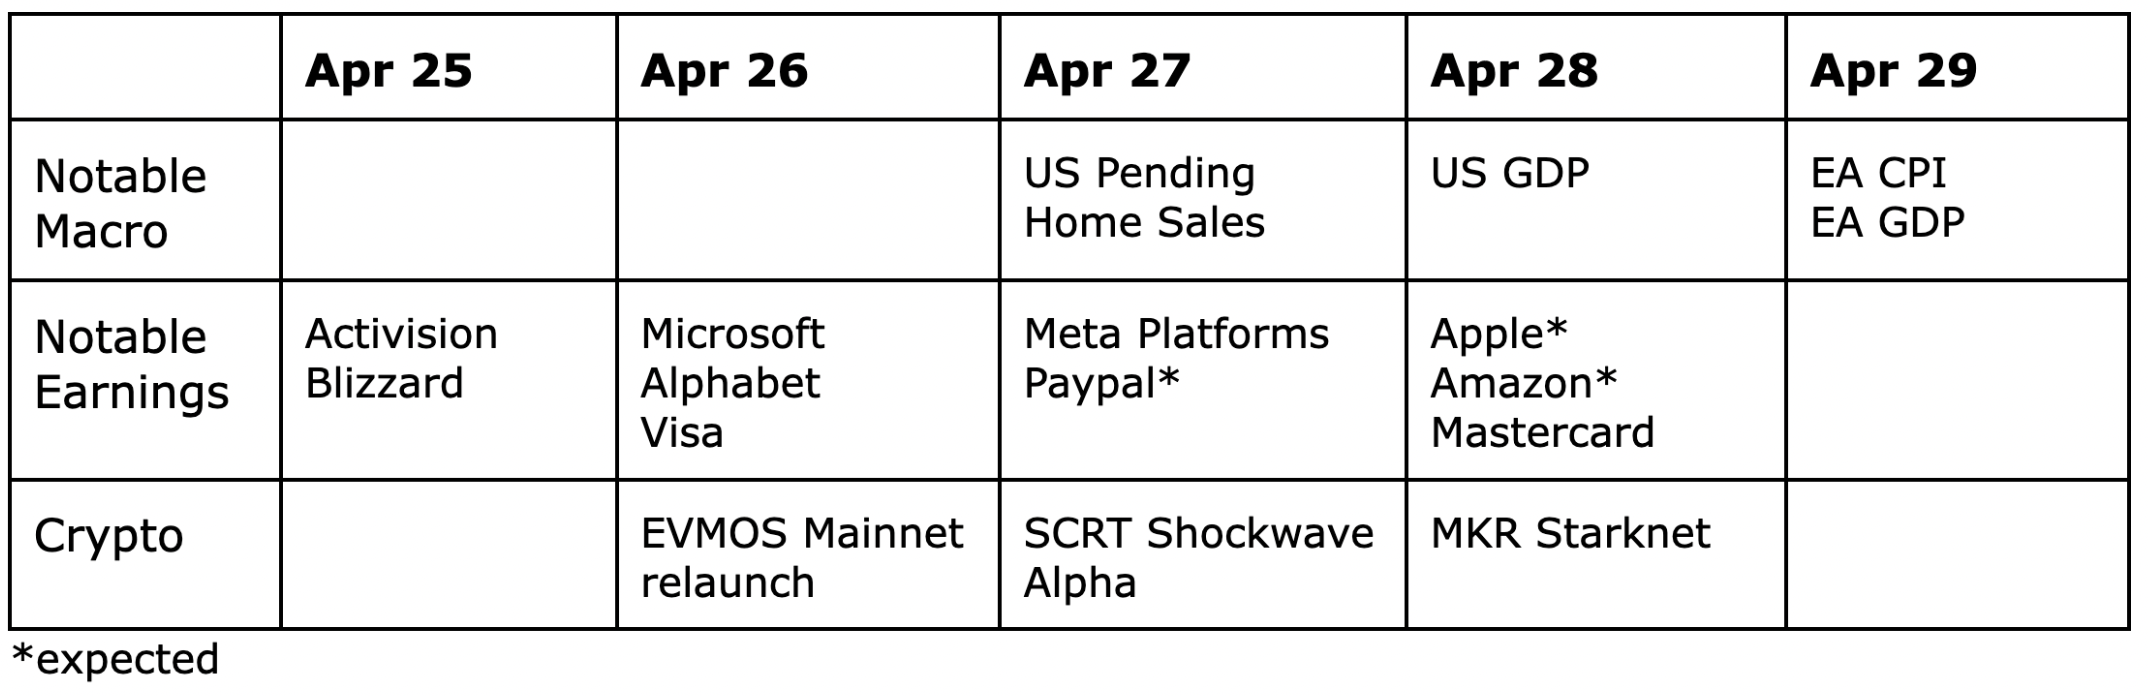 upcoming earnings and crypto events